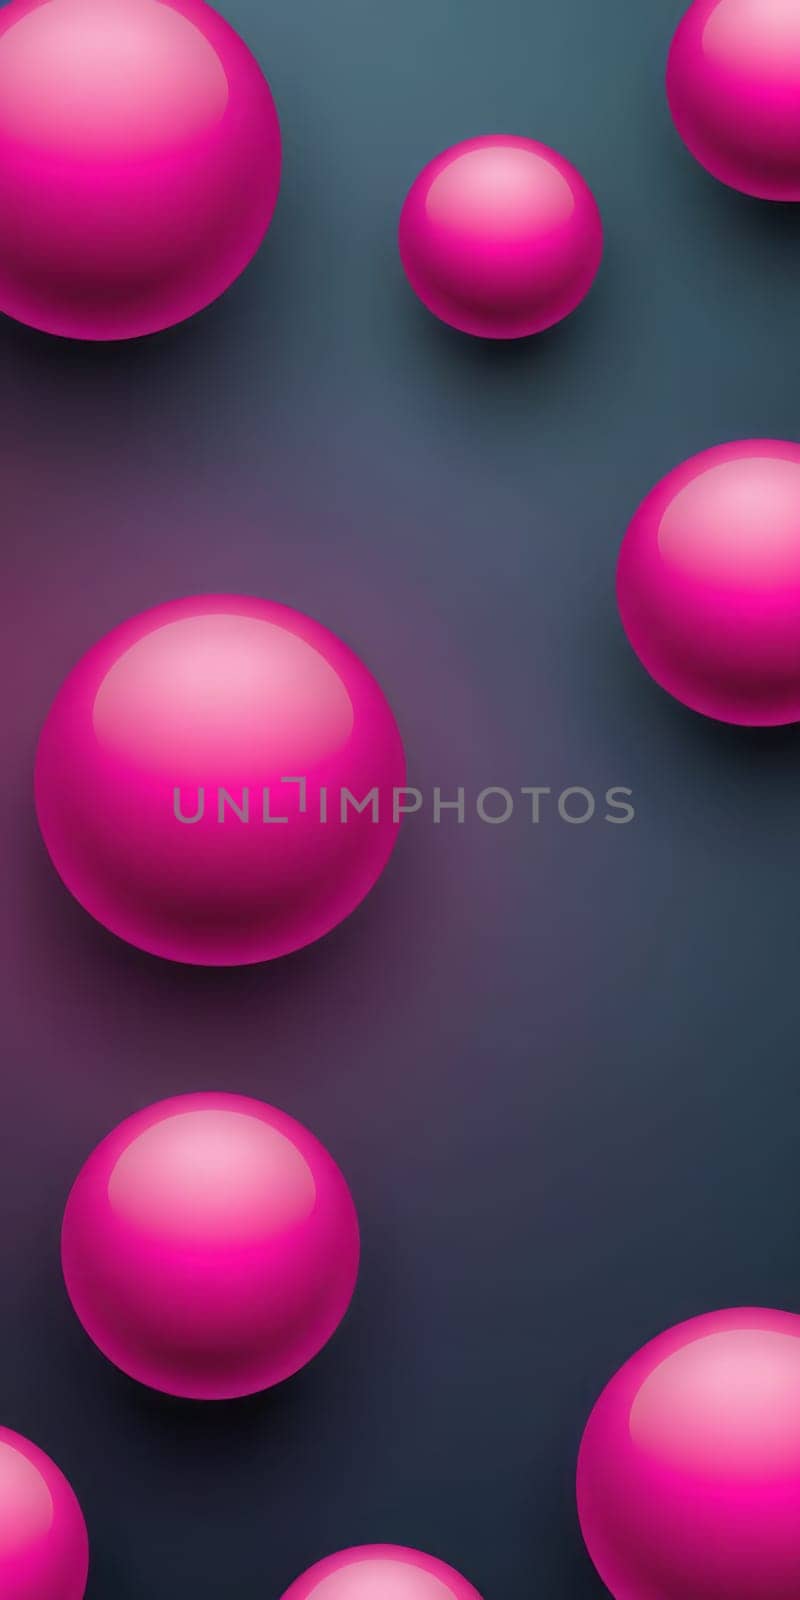 Spherical Shapes in Fuchsia and Gray by nkotlyar